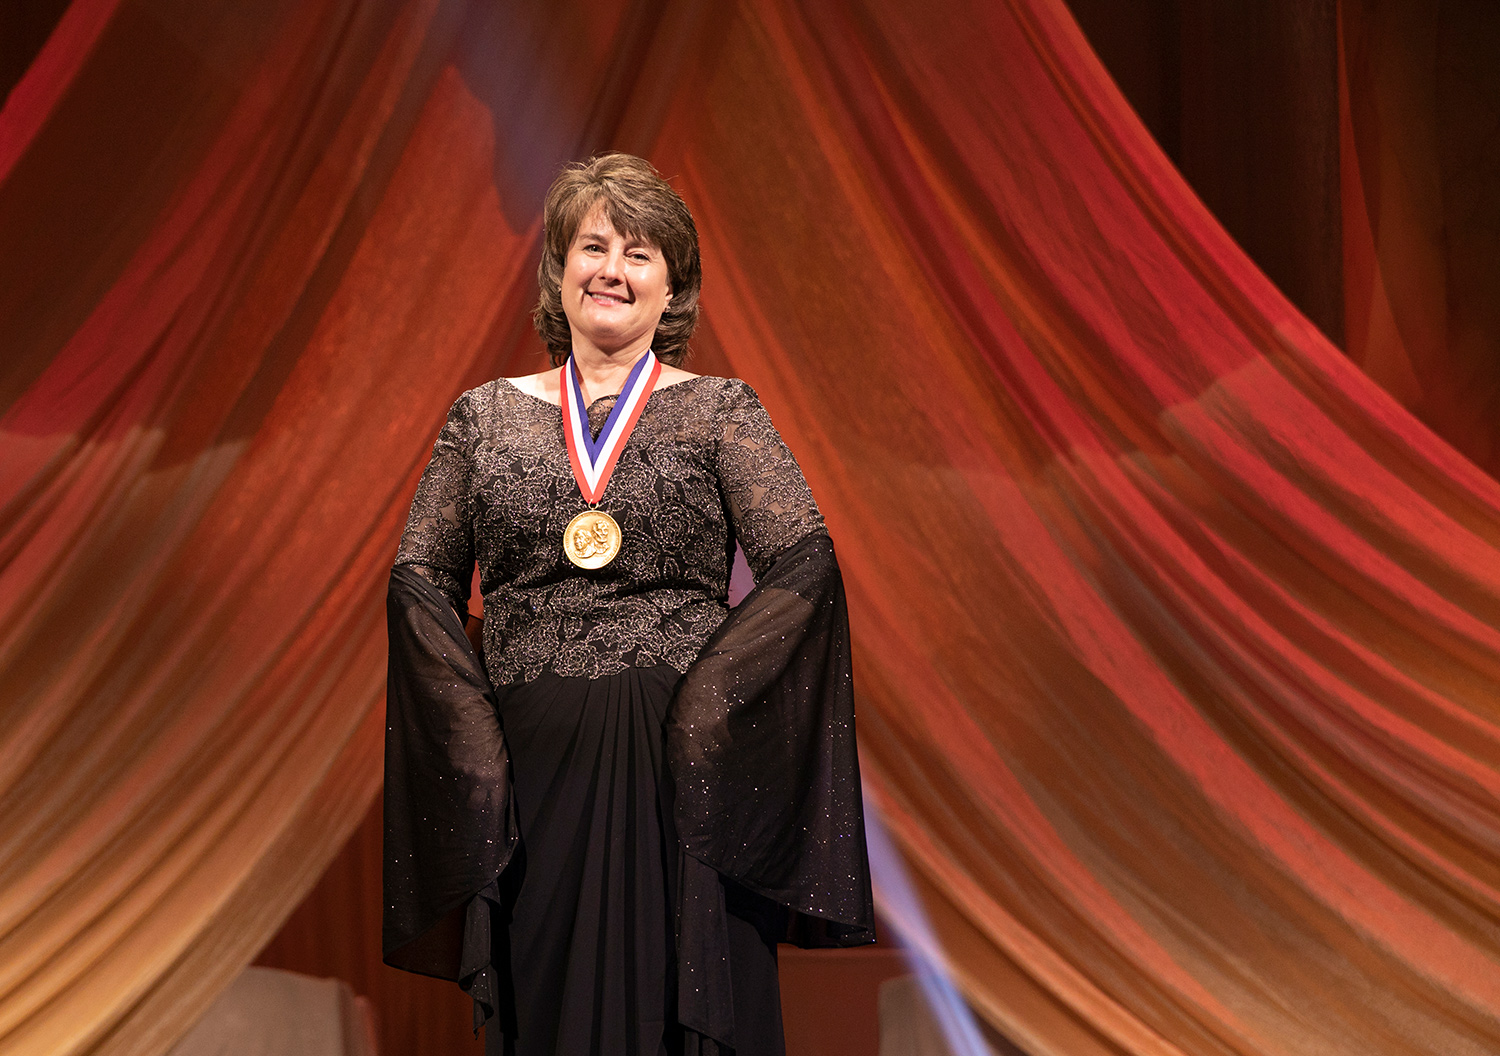 Jackie Quinn smiles with a medal on at the 2018 National Inventor Hall of Fame Induction Ceremony